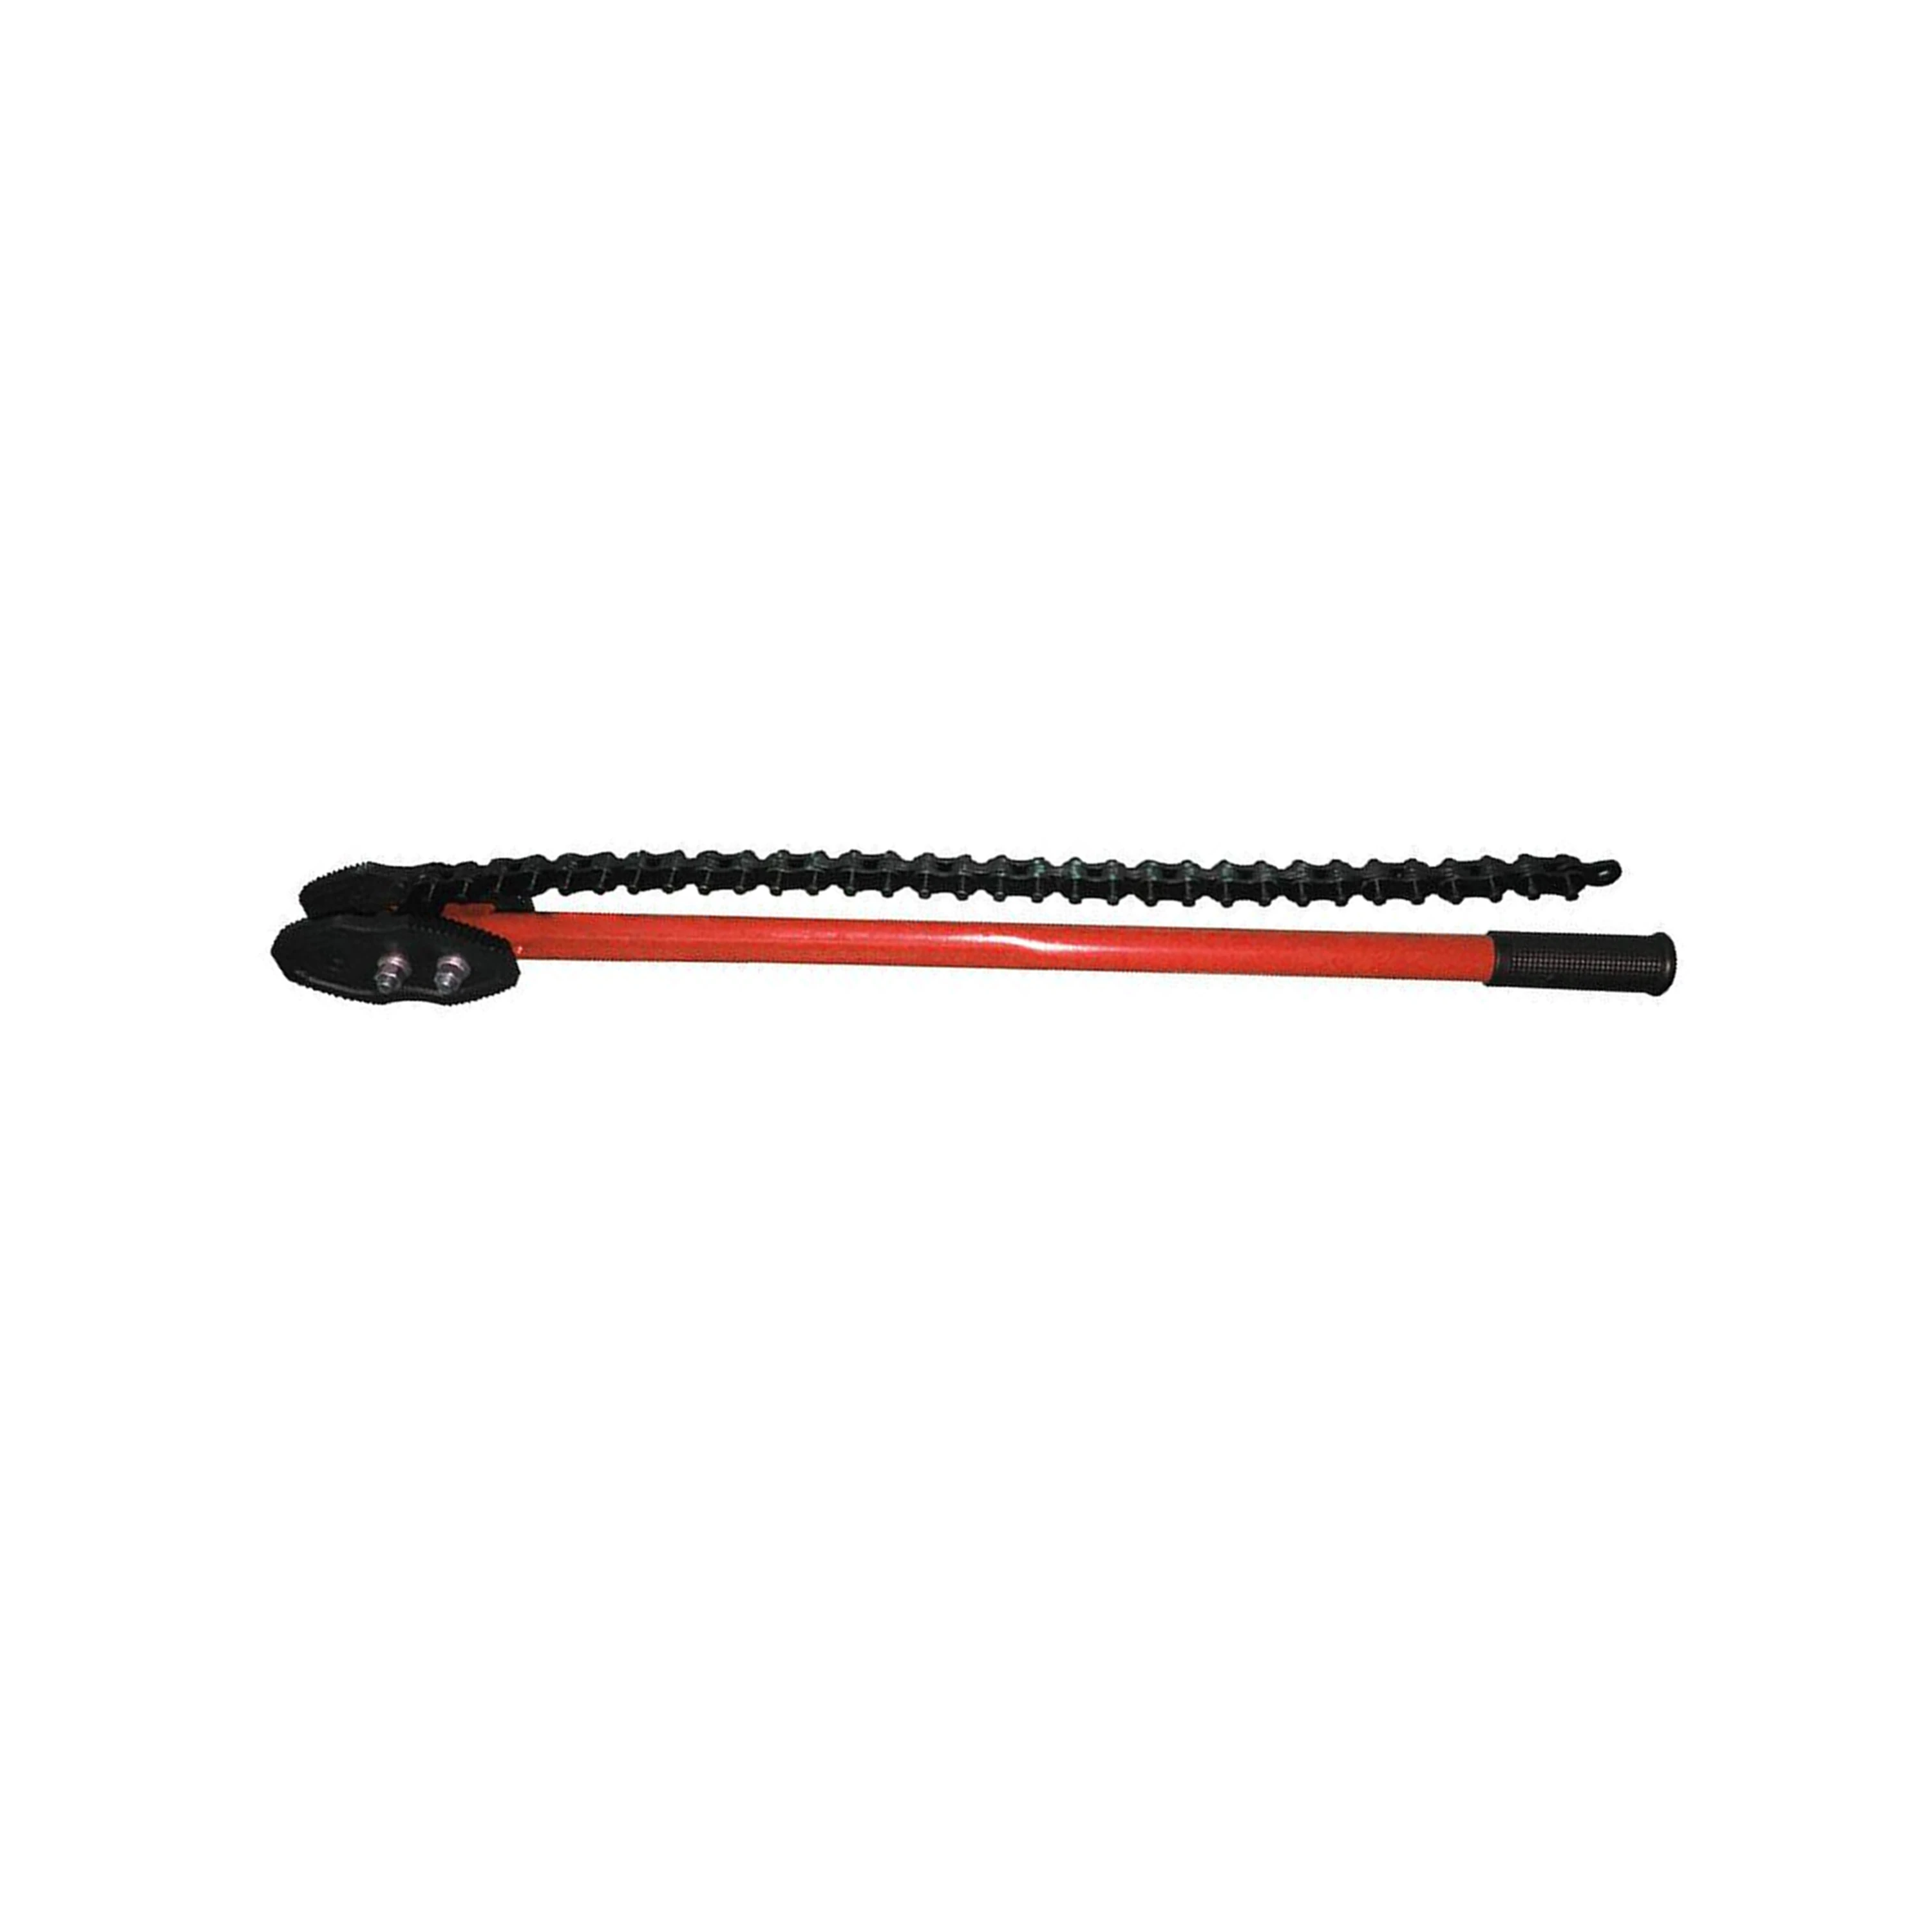 High quality alloy steel chain pipe wrench with whole body heat treated